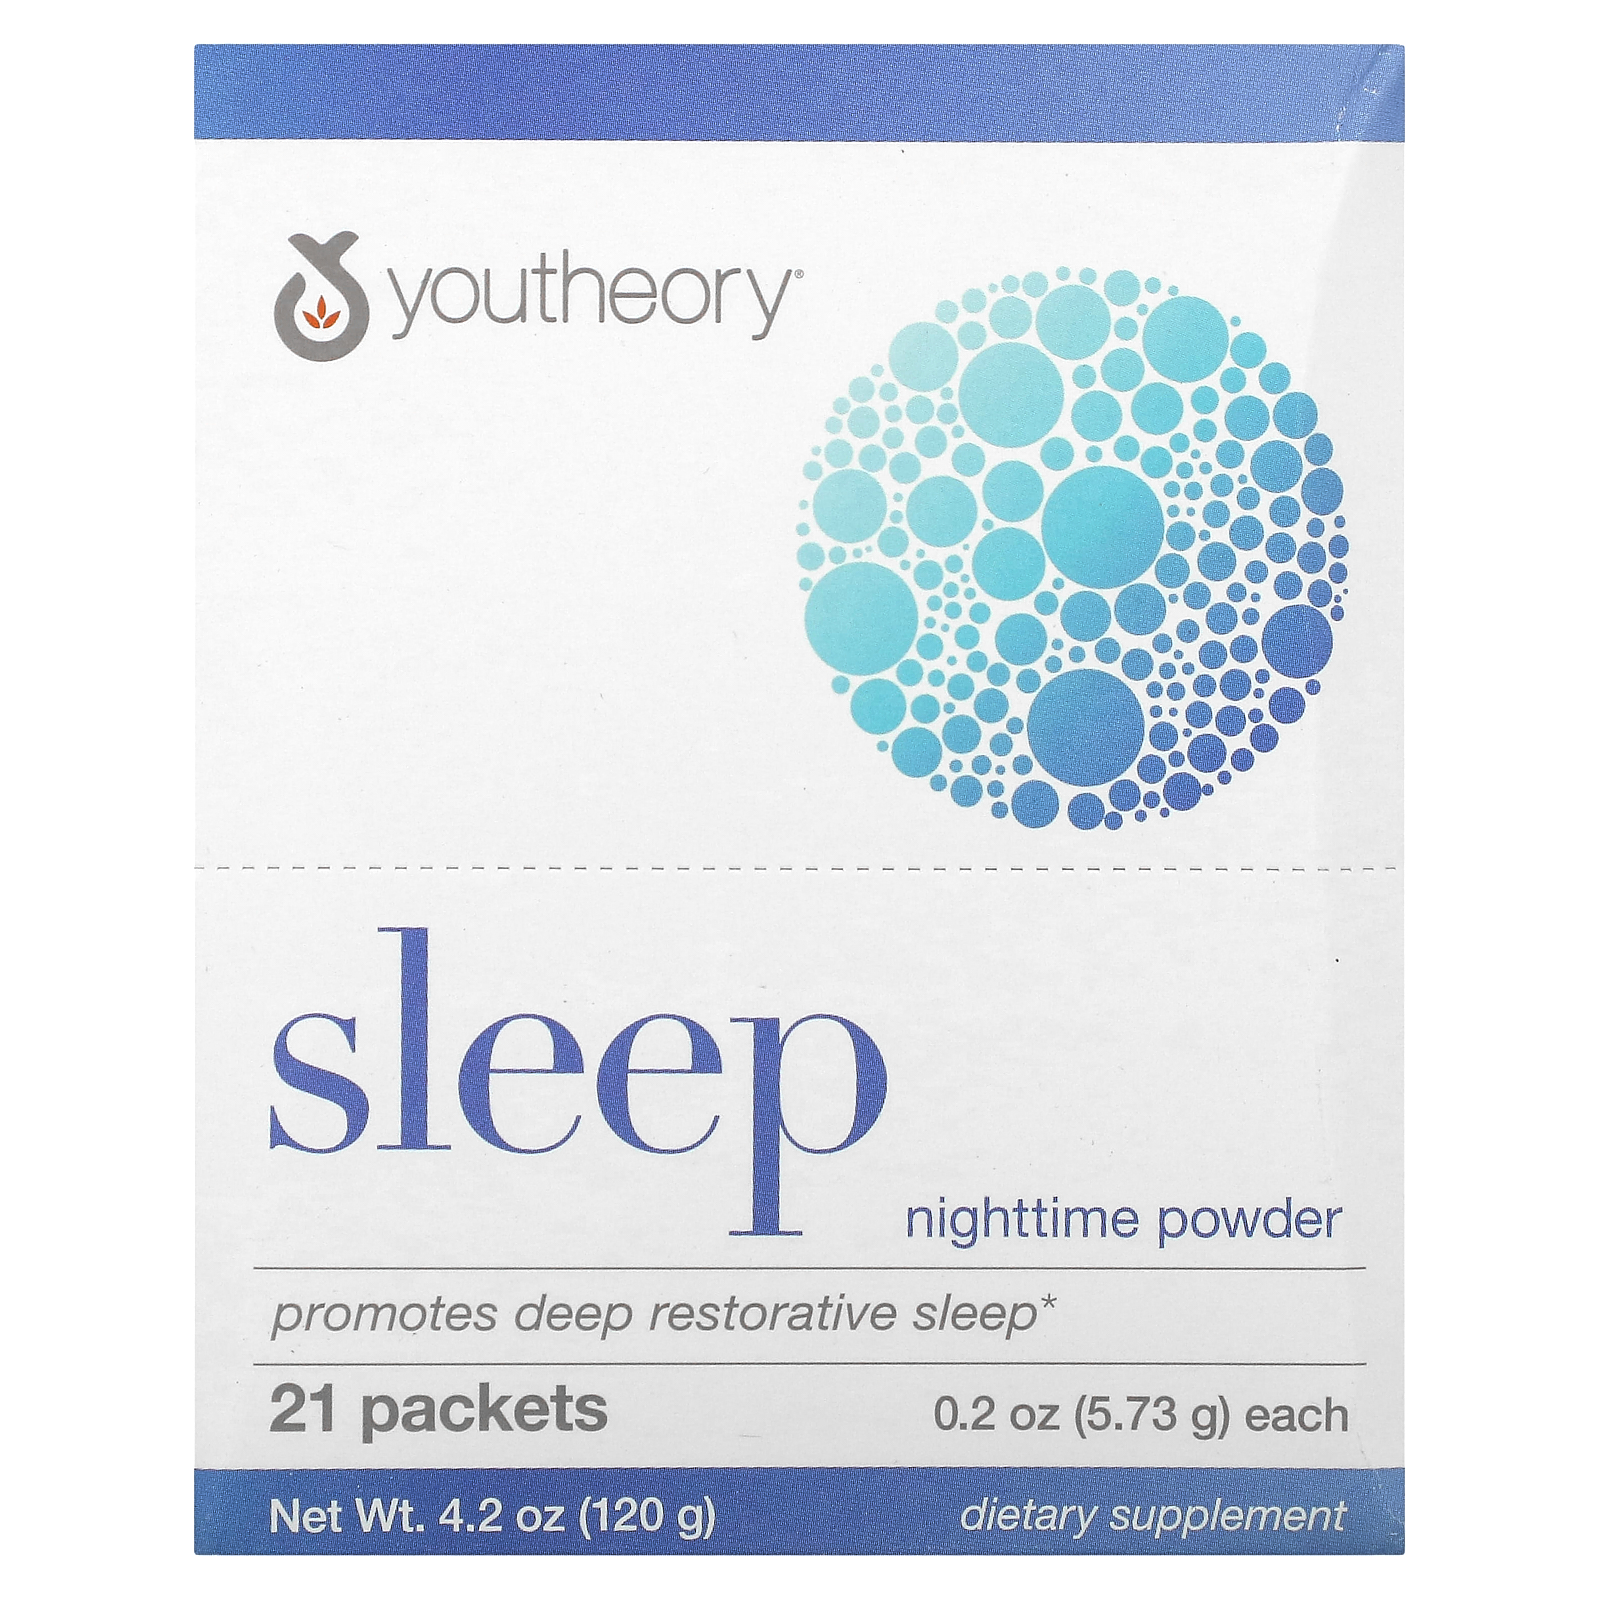 Sleep Powder Advanced (Lemon-Lime Flavor) - 21 Packets by youtheory - image 1 of 2